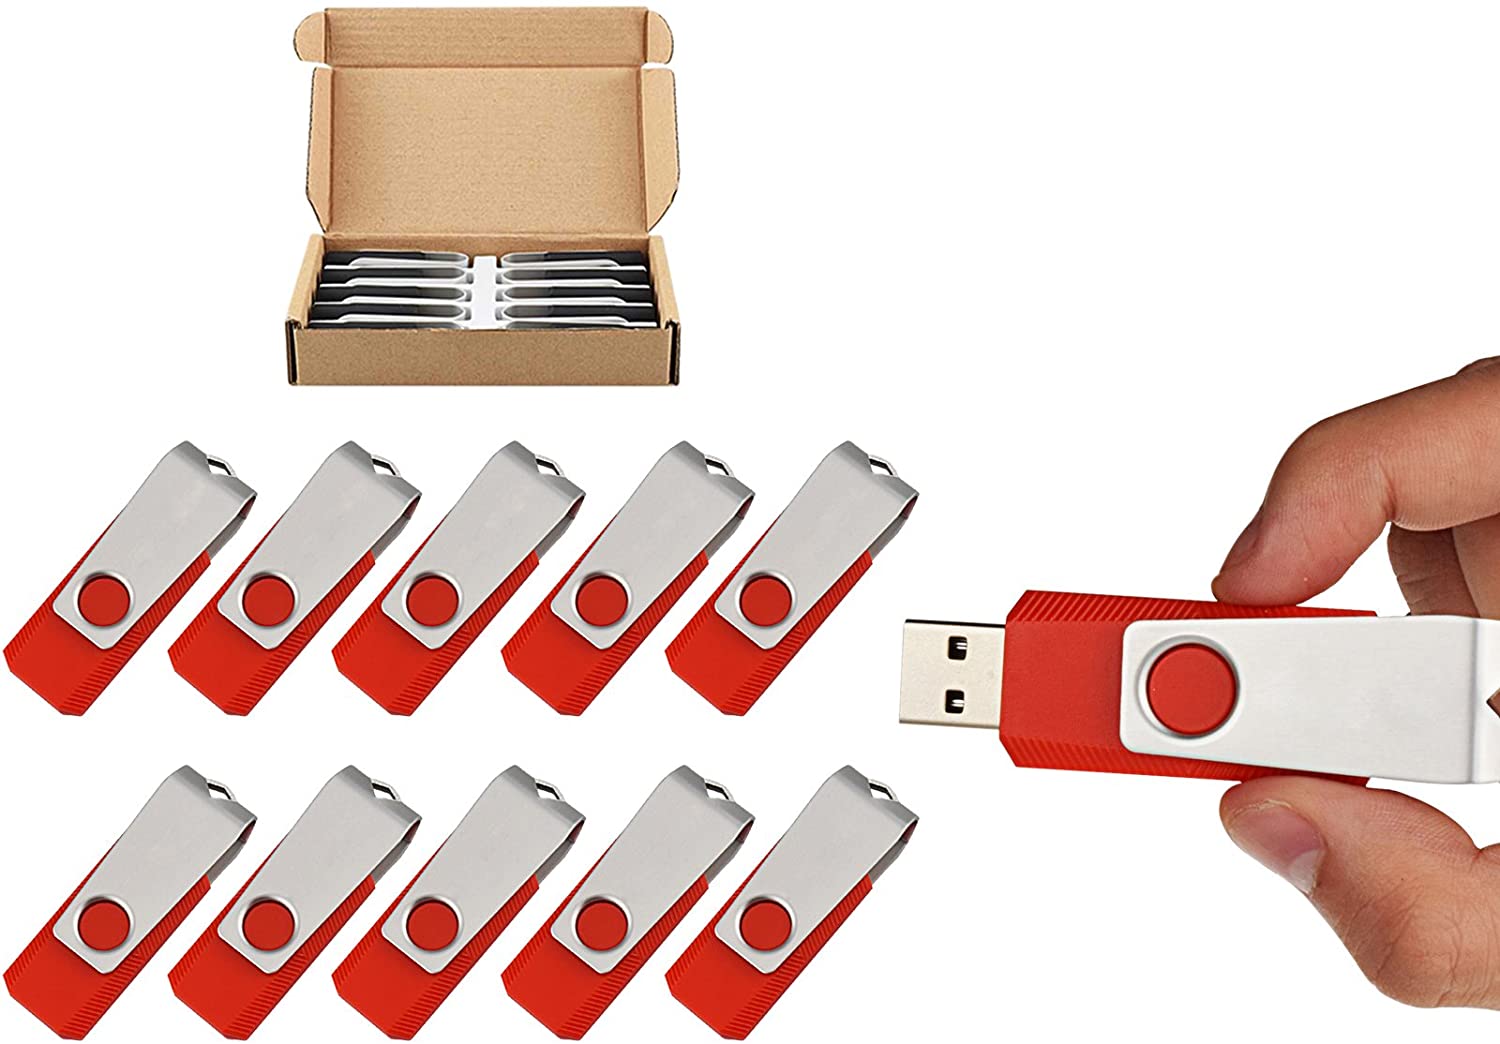 10 Pack 16GB Swivel Design USB 2.0 Flash Drive Red Color